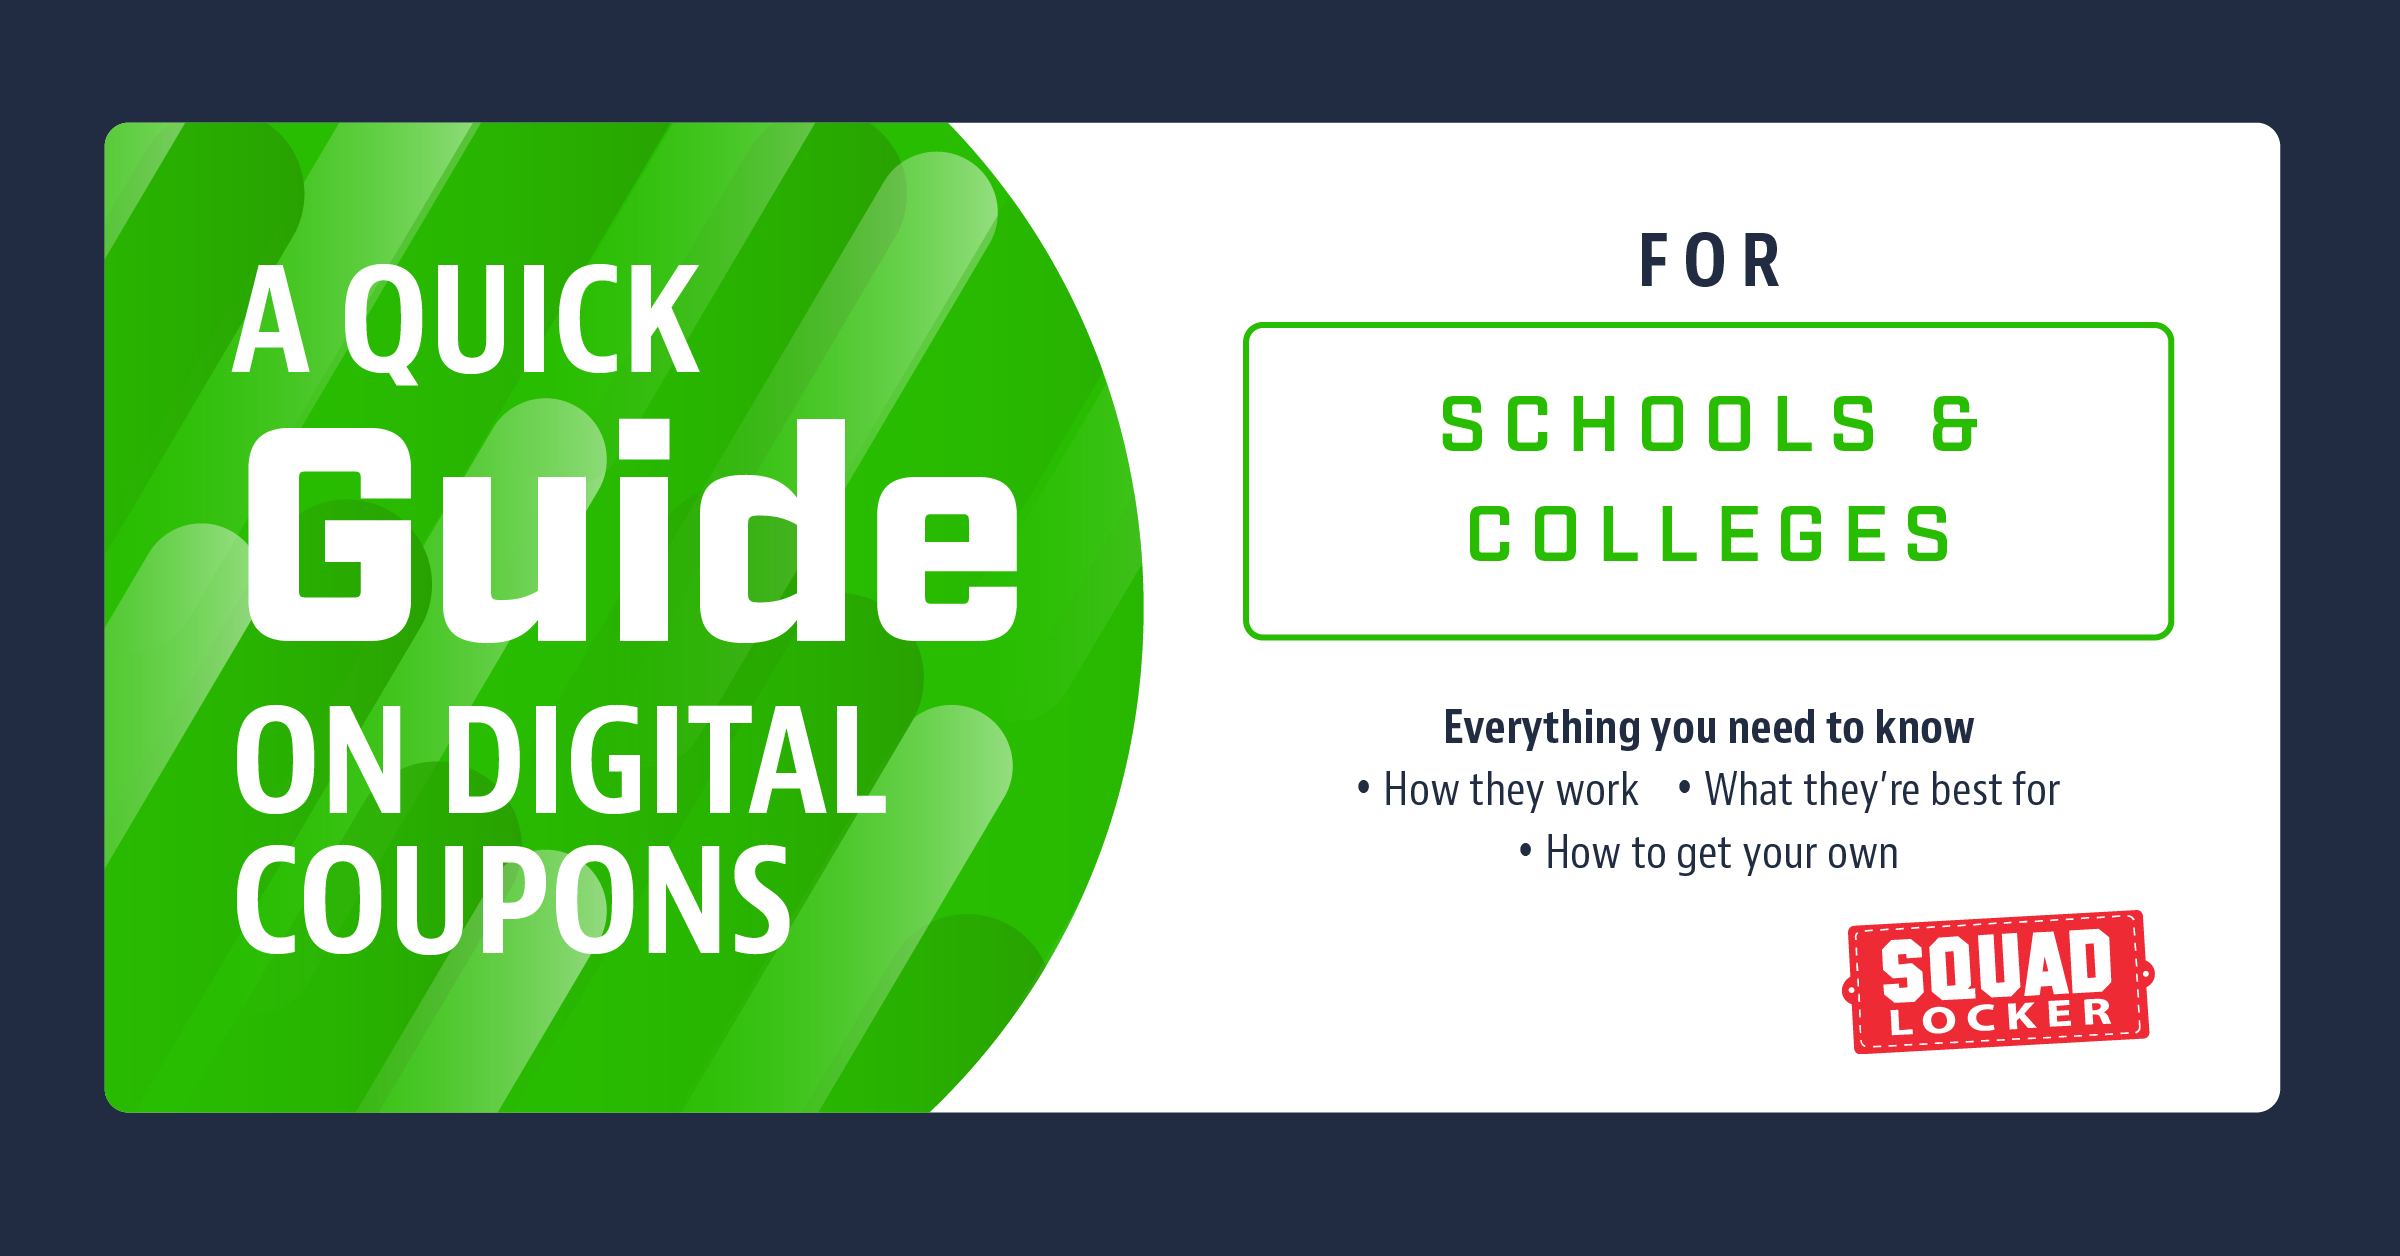 A Quick Guide on Digital Coupons for Schools & Colleges